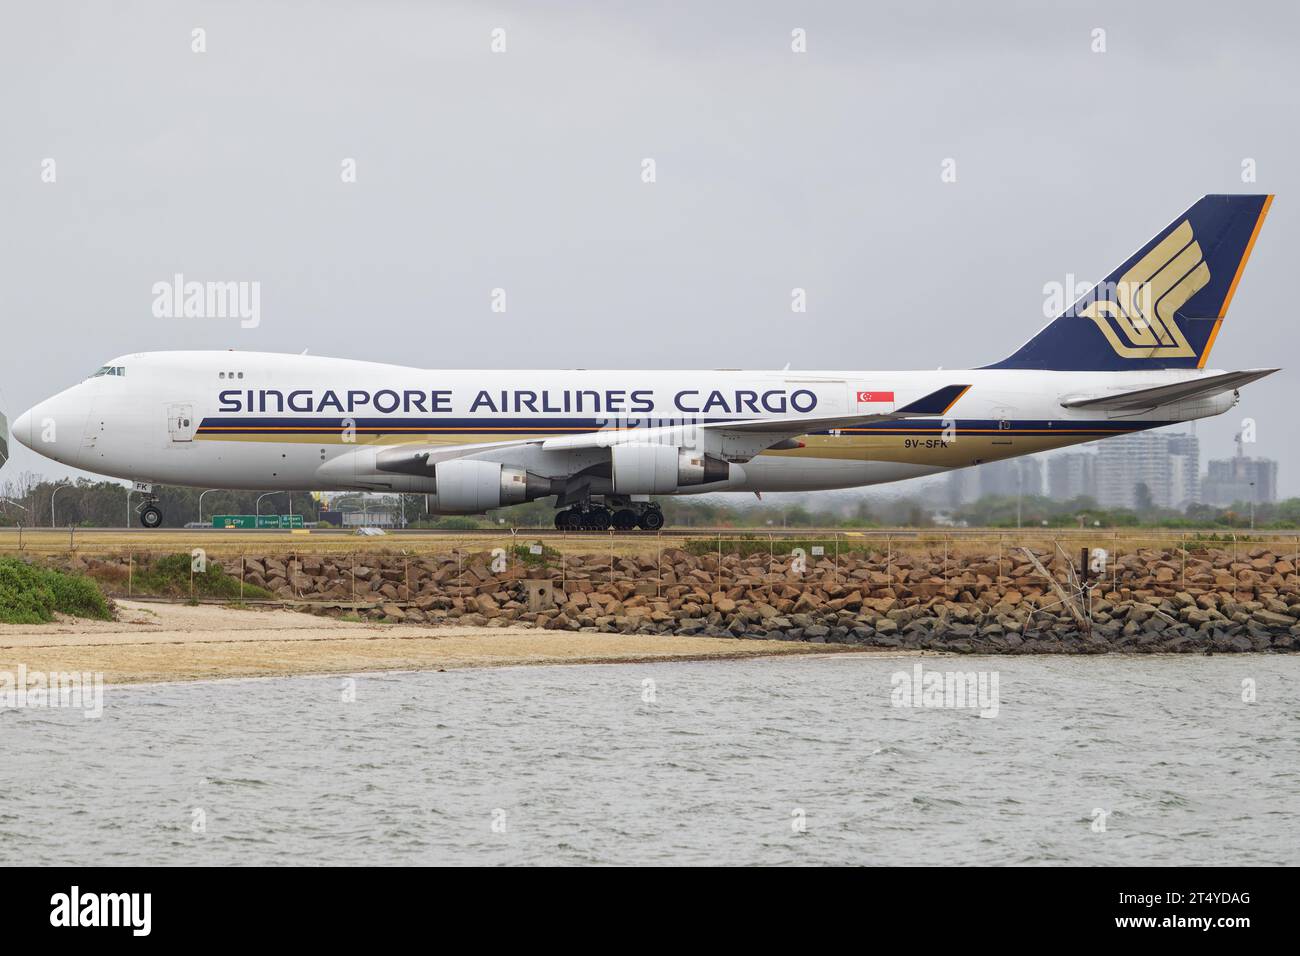 Singapore Airlines Cargo Boeing 747-400F seen taxiing at Sydney Airport. Stock Photo